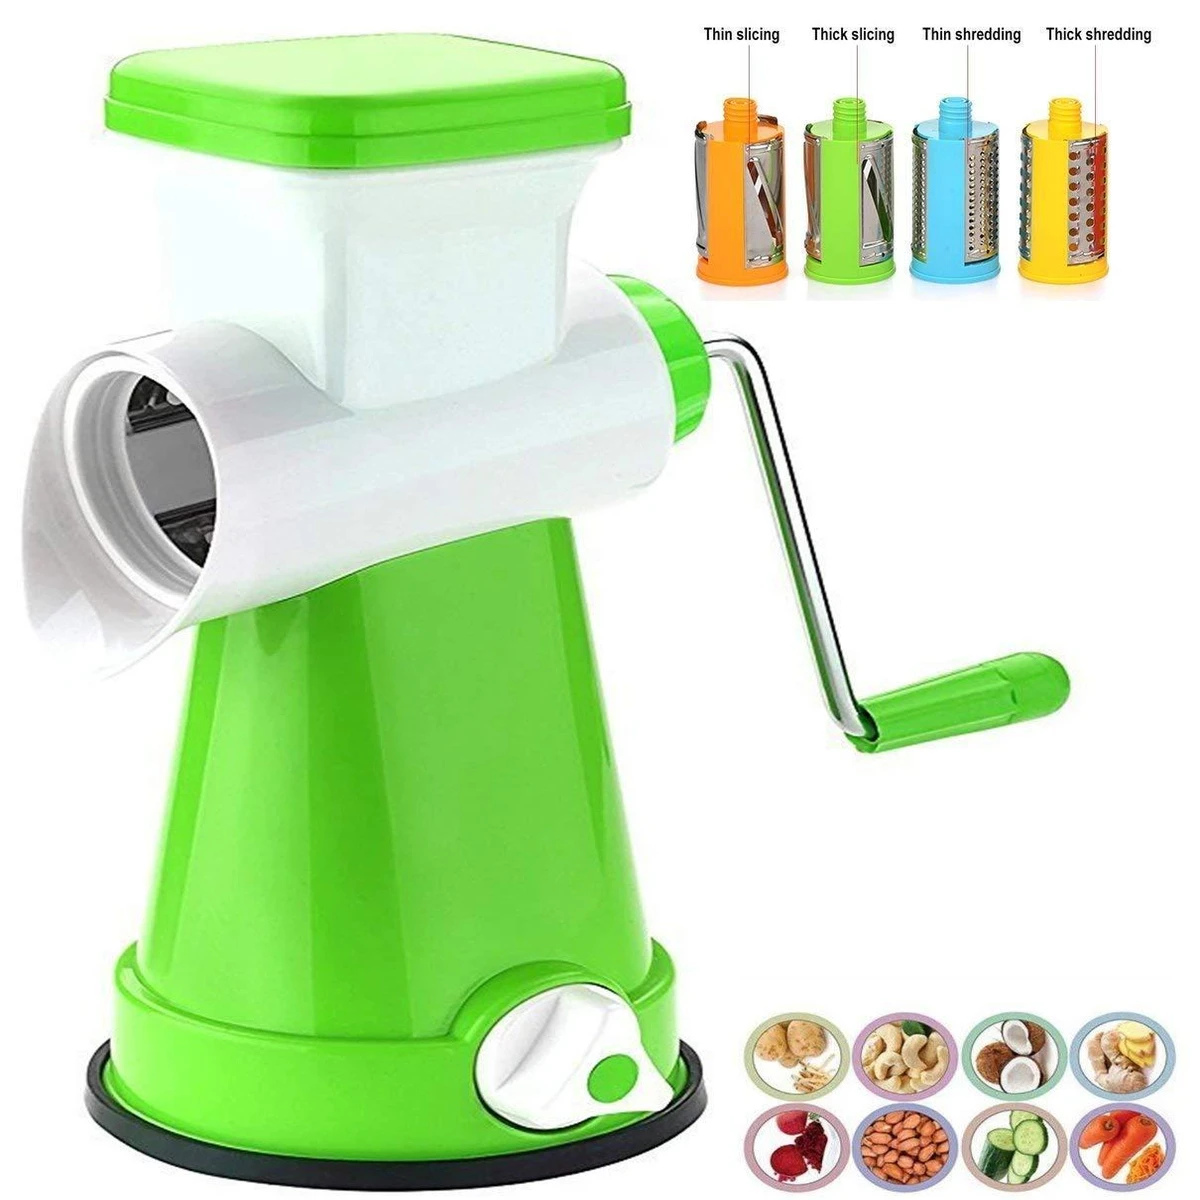 Multifunctional Choppers for Kitchen (Dry Fruit, Cheese, Vegetable Grater & Slicer)